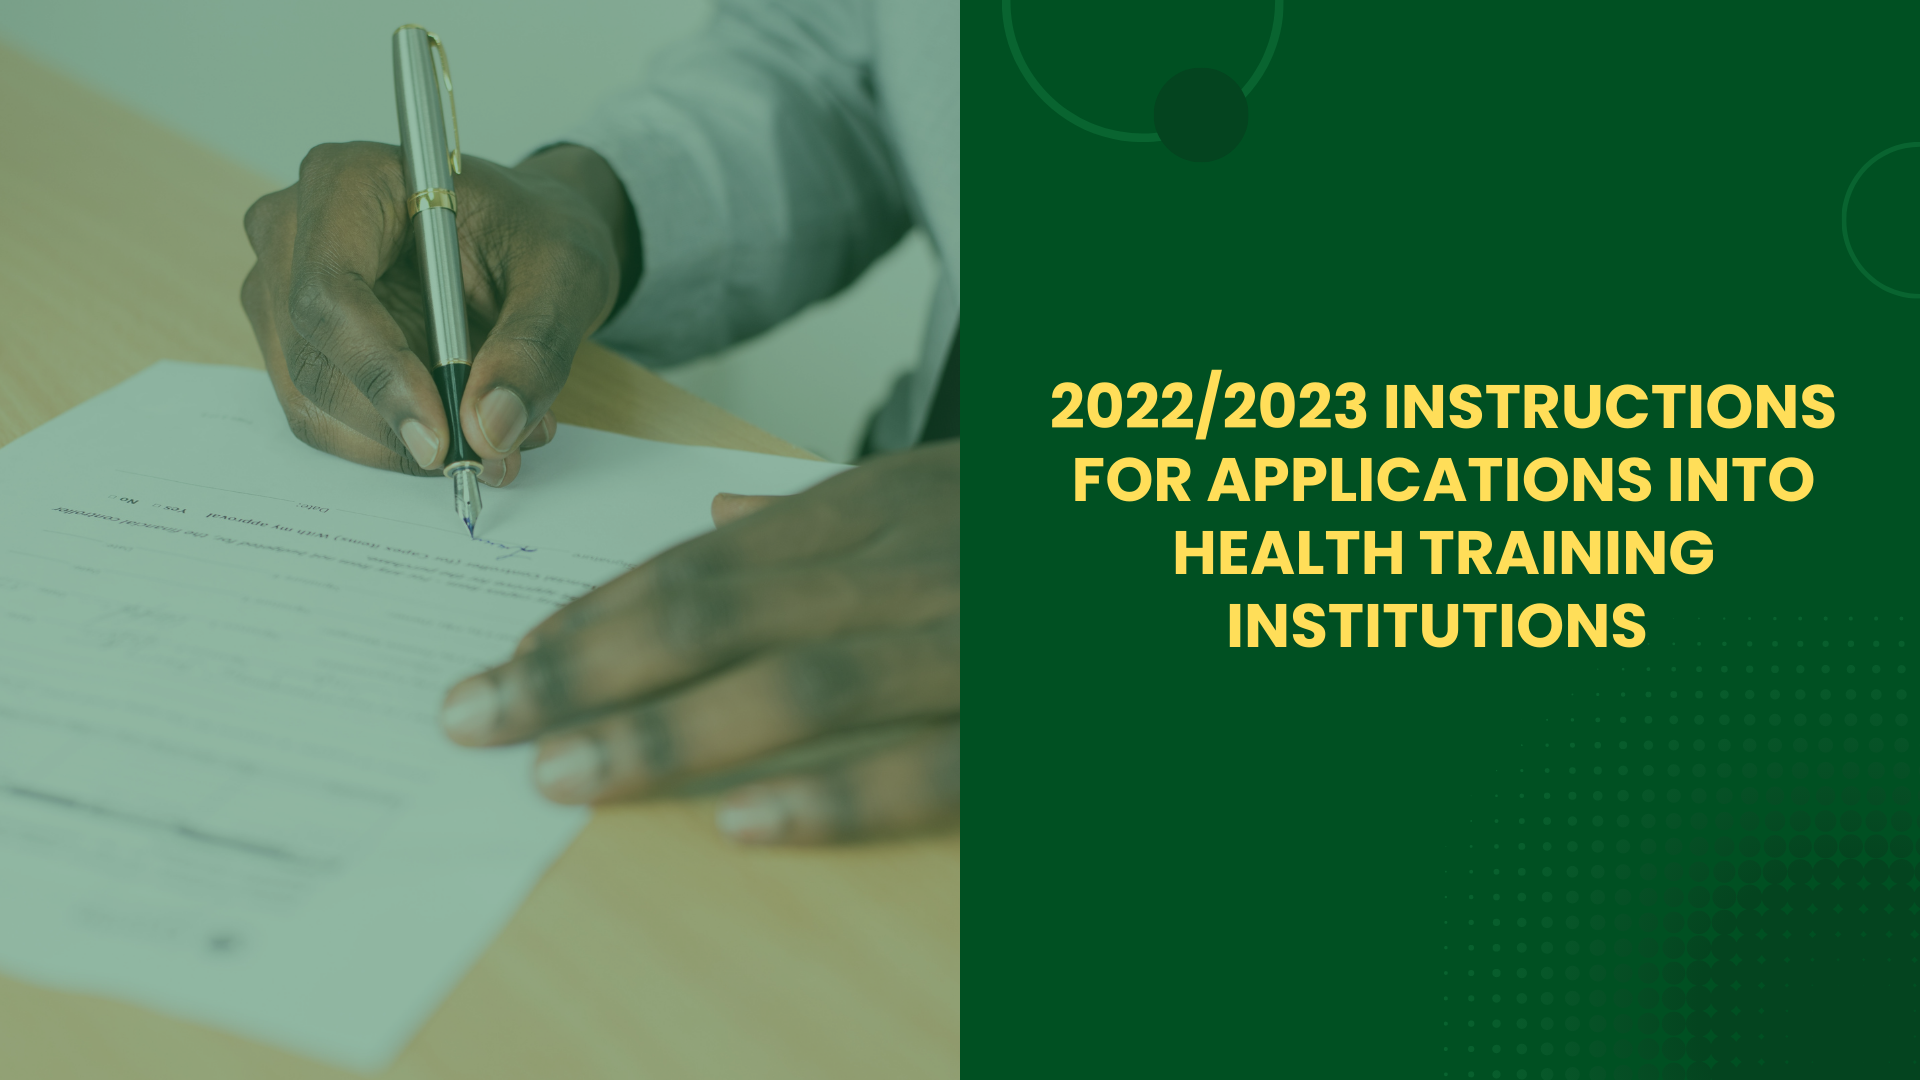 2022/2023 INSTRUCTIONS FOR APPLICATIONS INTO HEALTH TRAINING INSTITUTIONS  MINISTRY OF HEALTH 